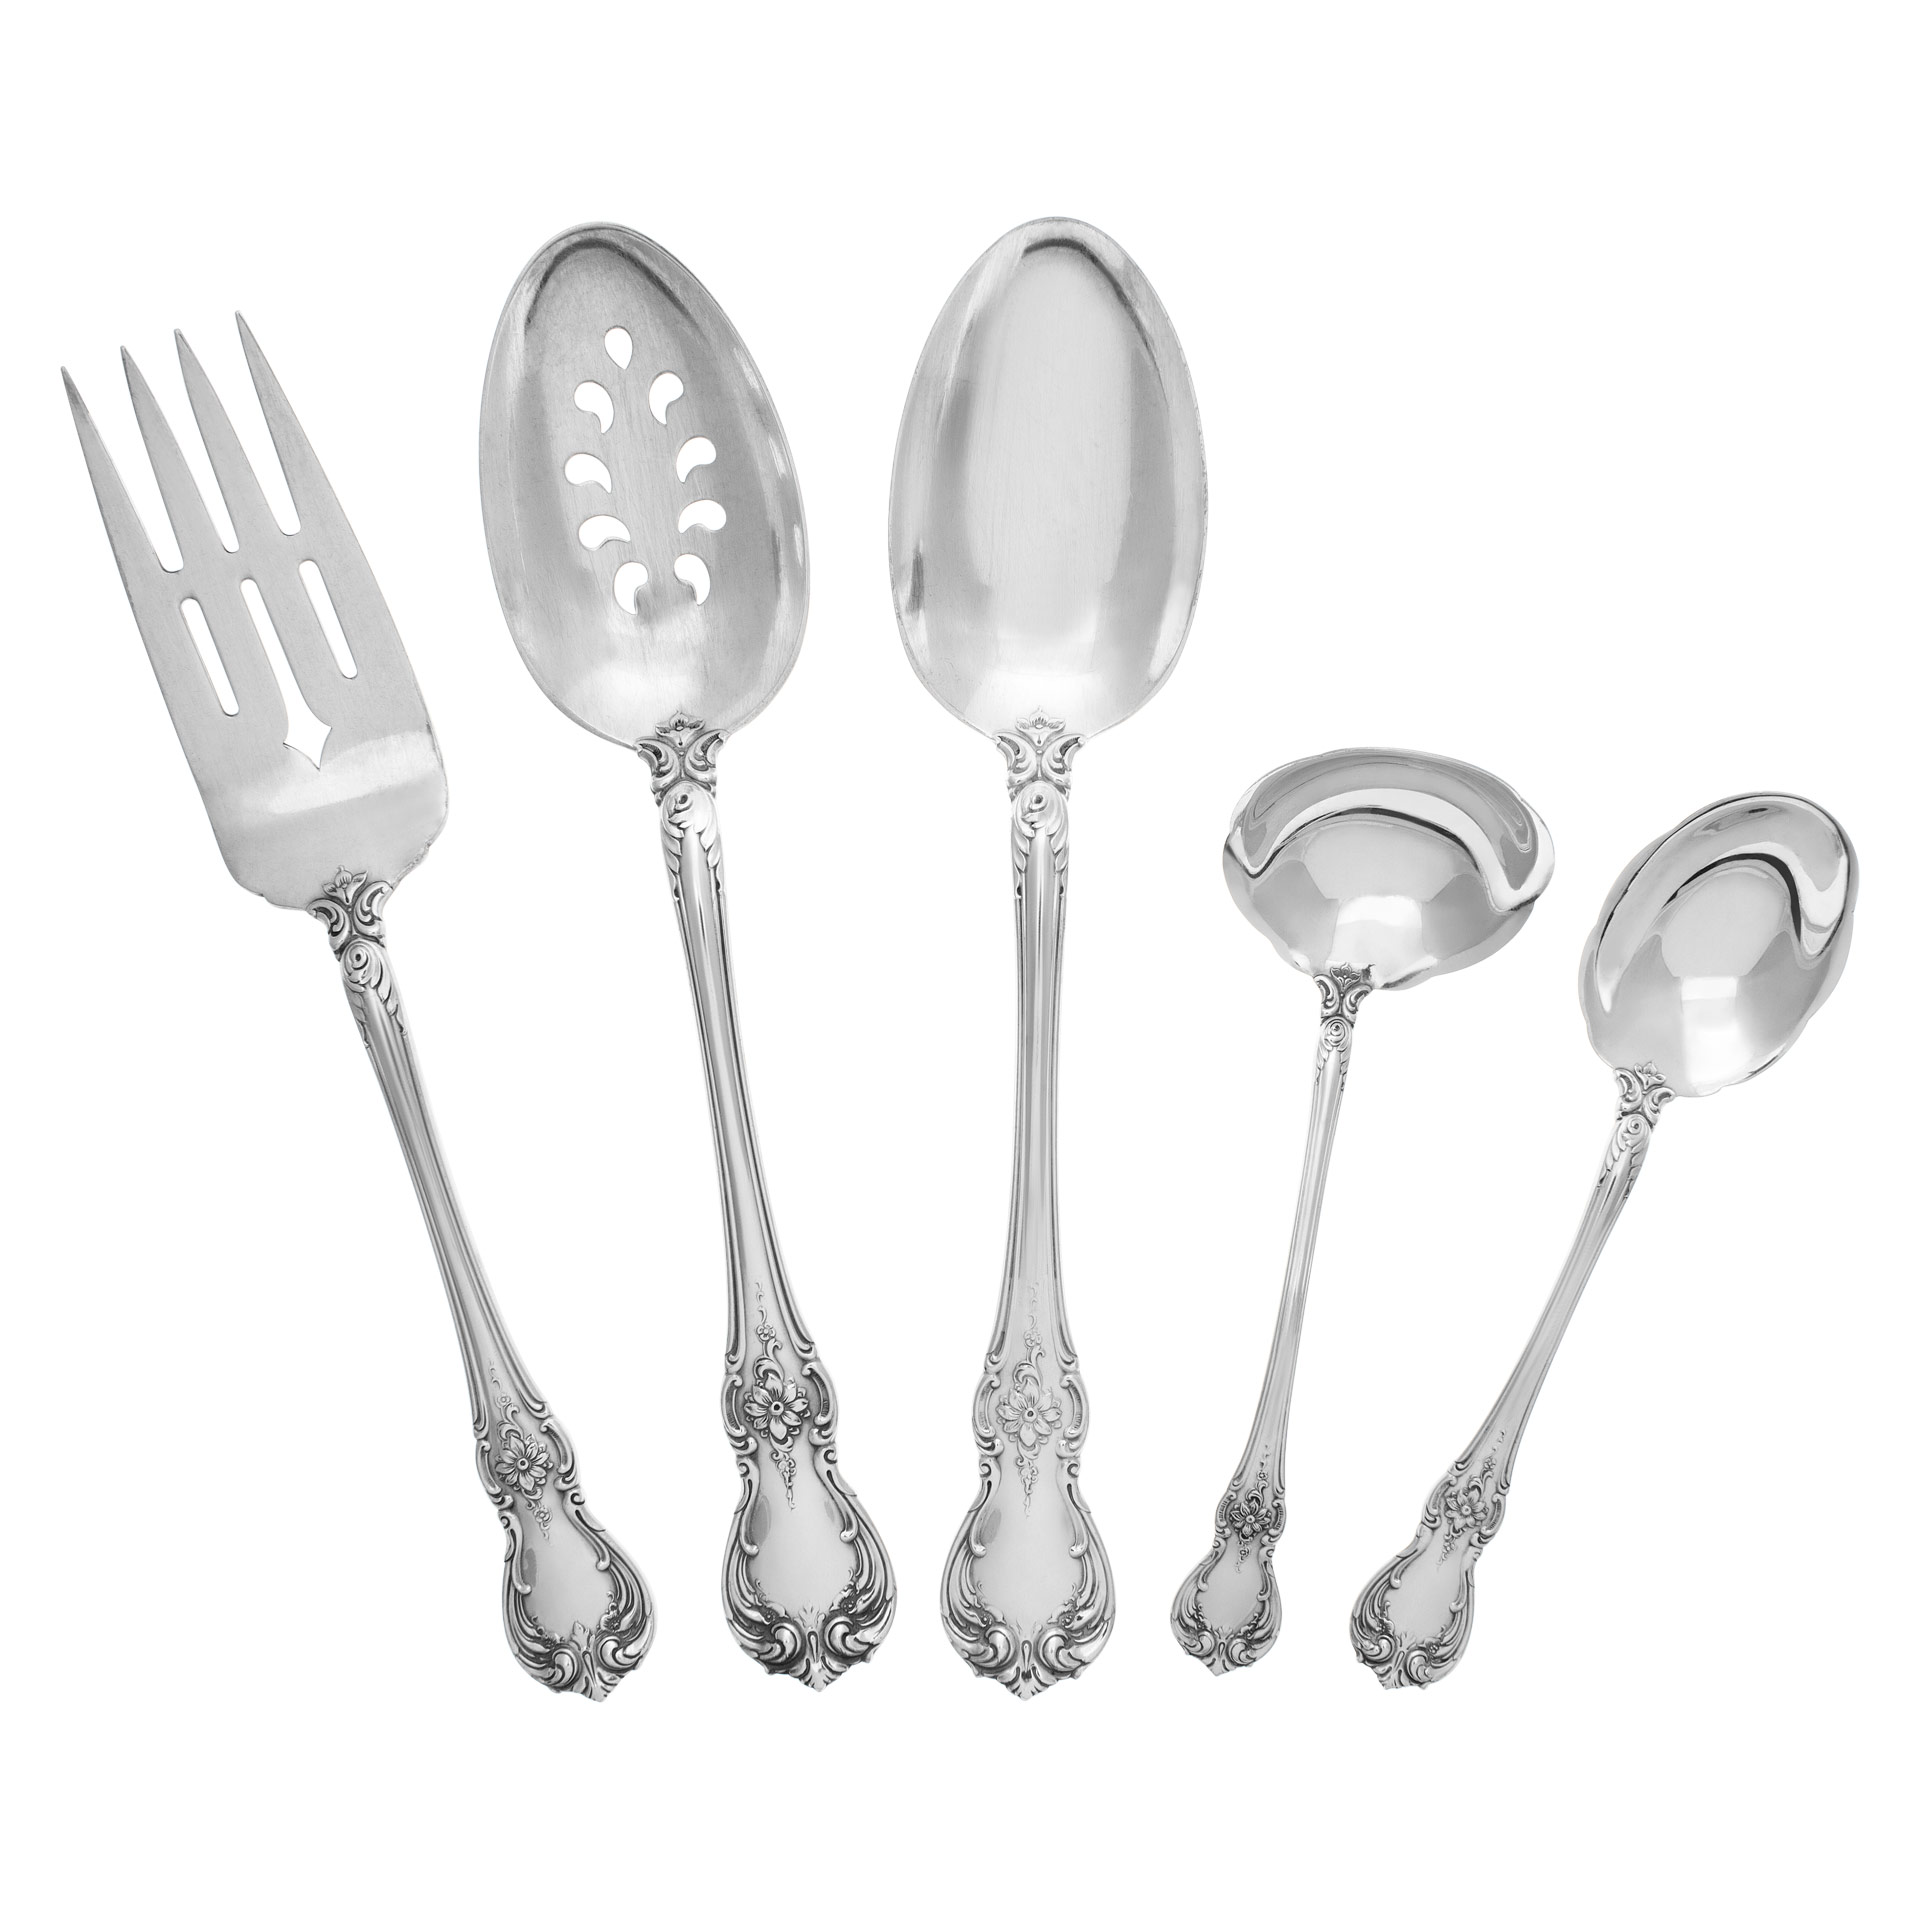 "OLD MASTER" Sterling Silver Flatware Set, Ptd in 1942  by Towle Silversmiths. 128 PIECES TOTAL- 6 Place Settings for 20 (xtra) + 7 Serving Pieces- 162 ounces troy of .925  Sterling Silver.TOTAL 139 pieces. image 4